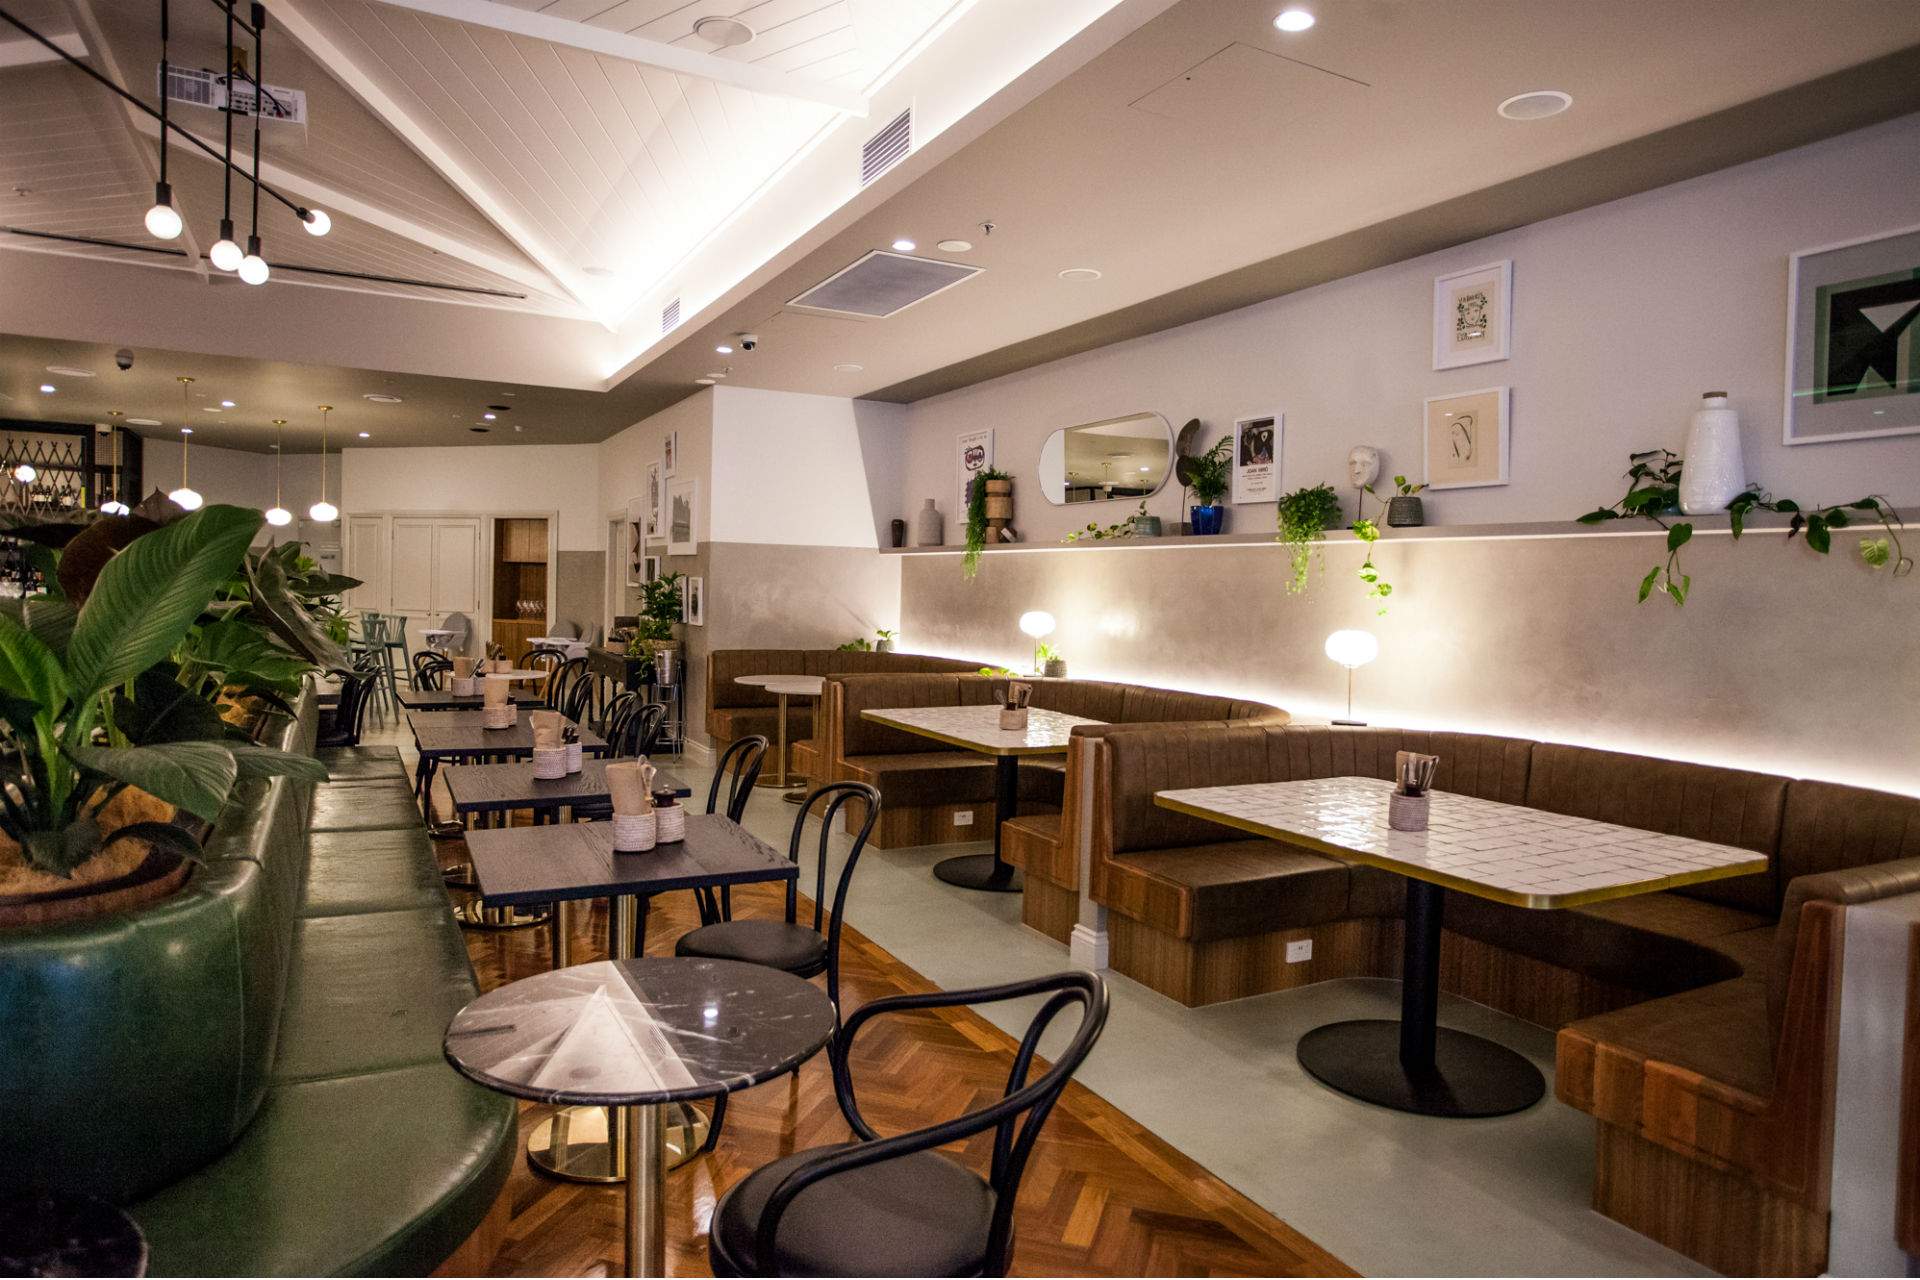 Meet Isles Lane, Brisbane's New Parkside Pub Right in the Middle of the City